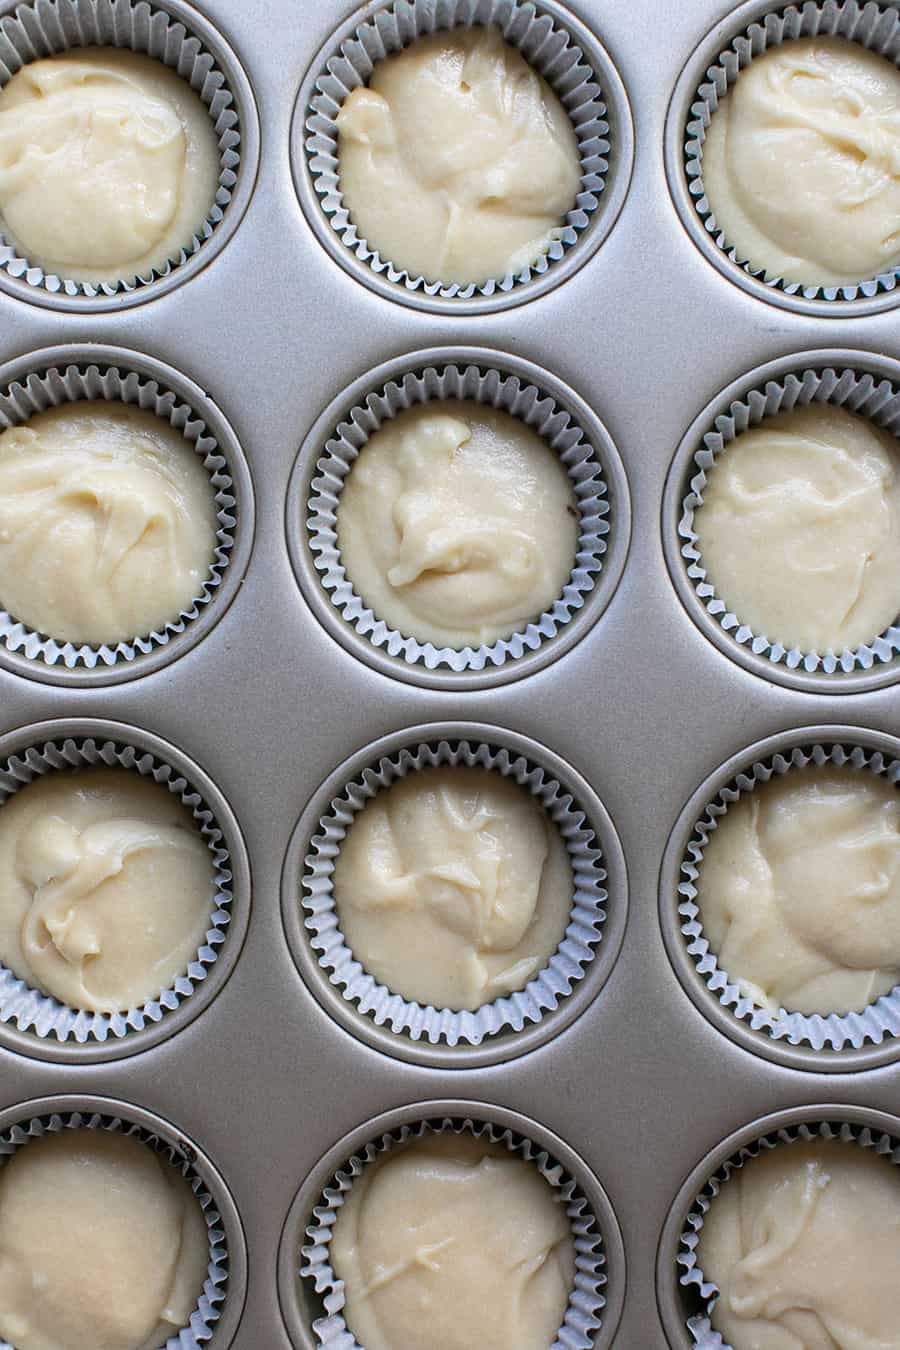 Vanilla cupcakes in tin before baked